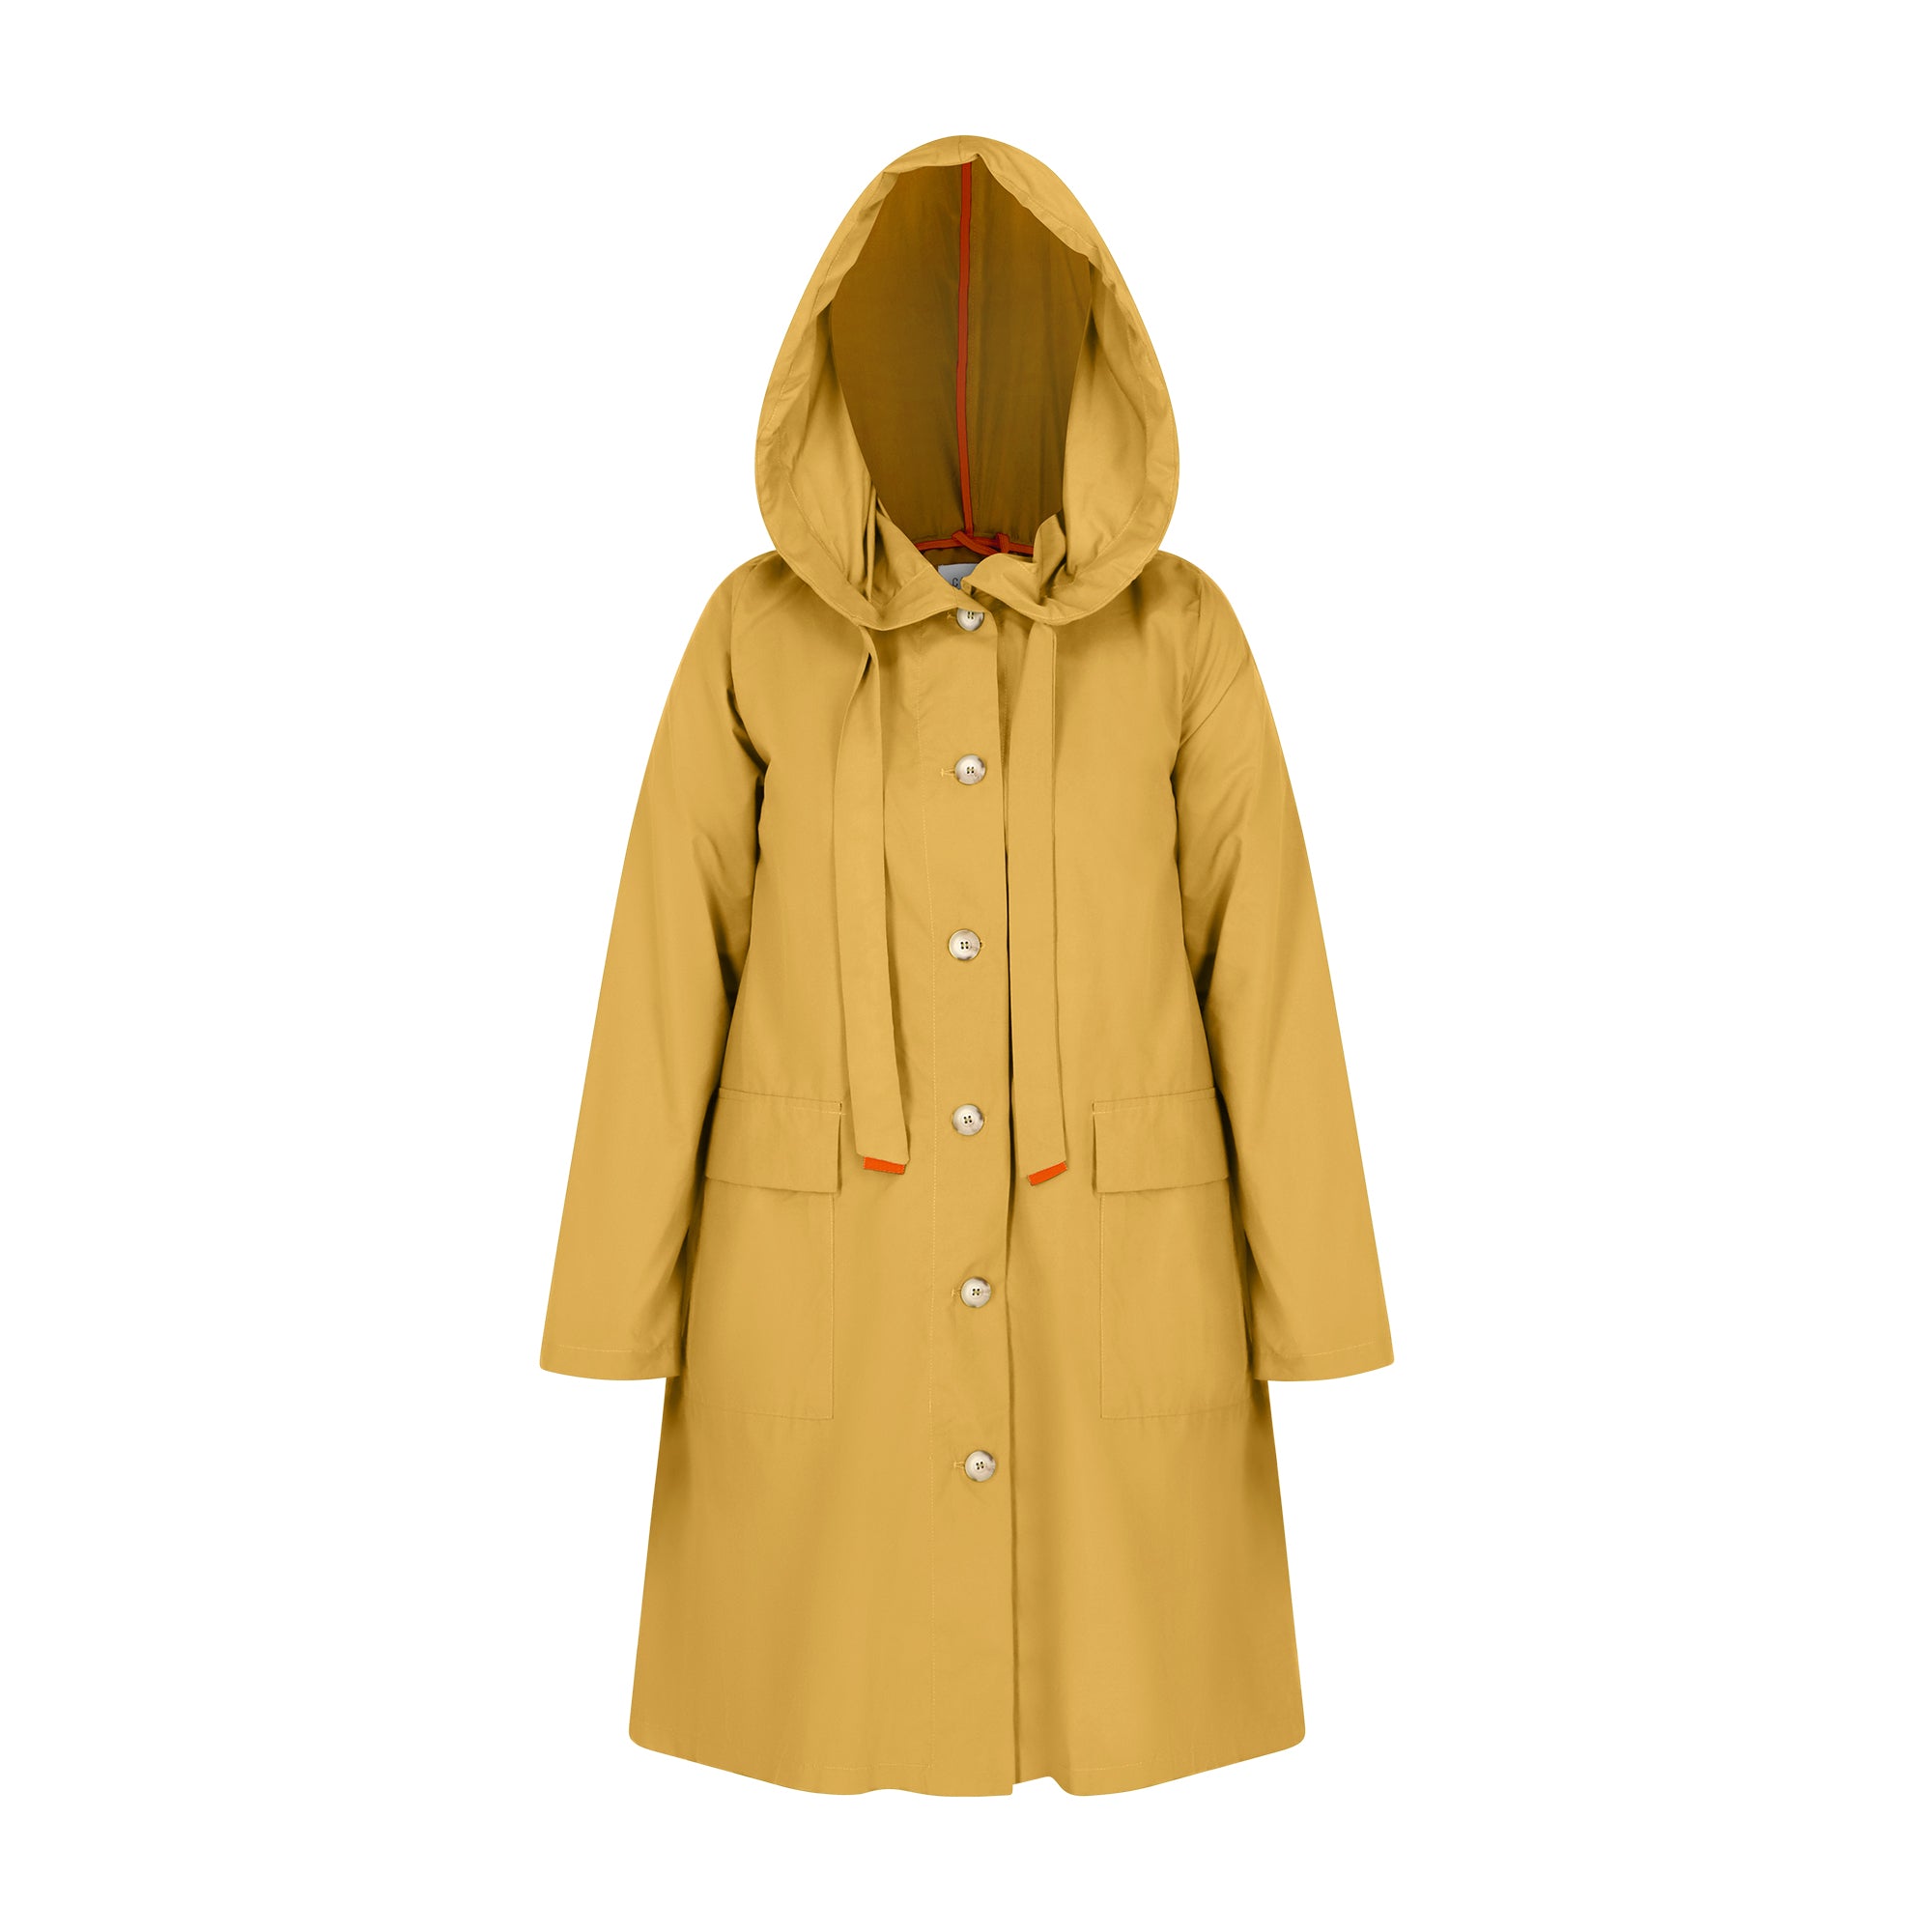 The classic raincoat - curry color - front view